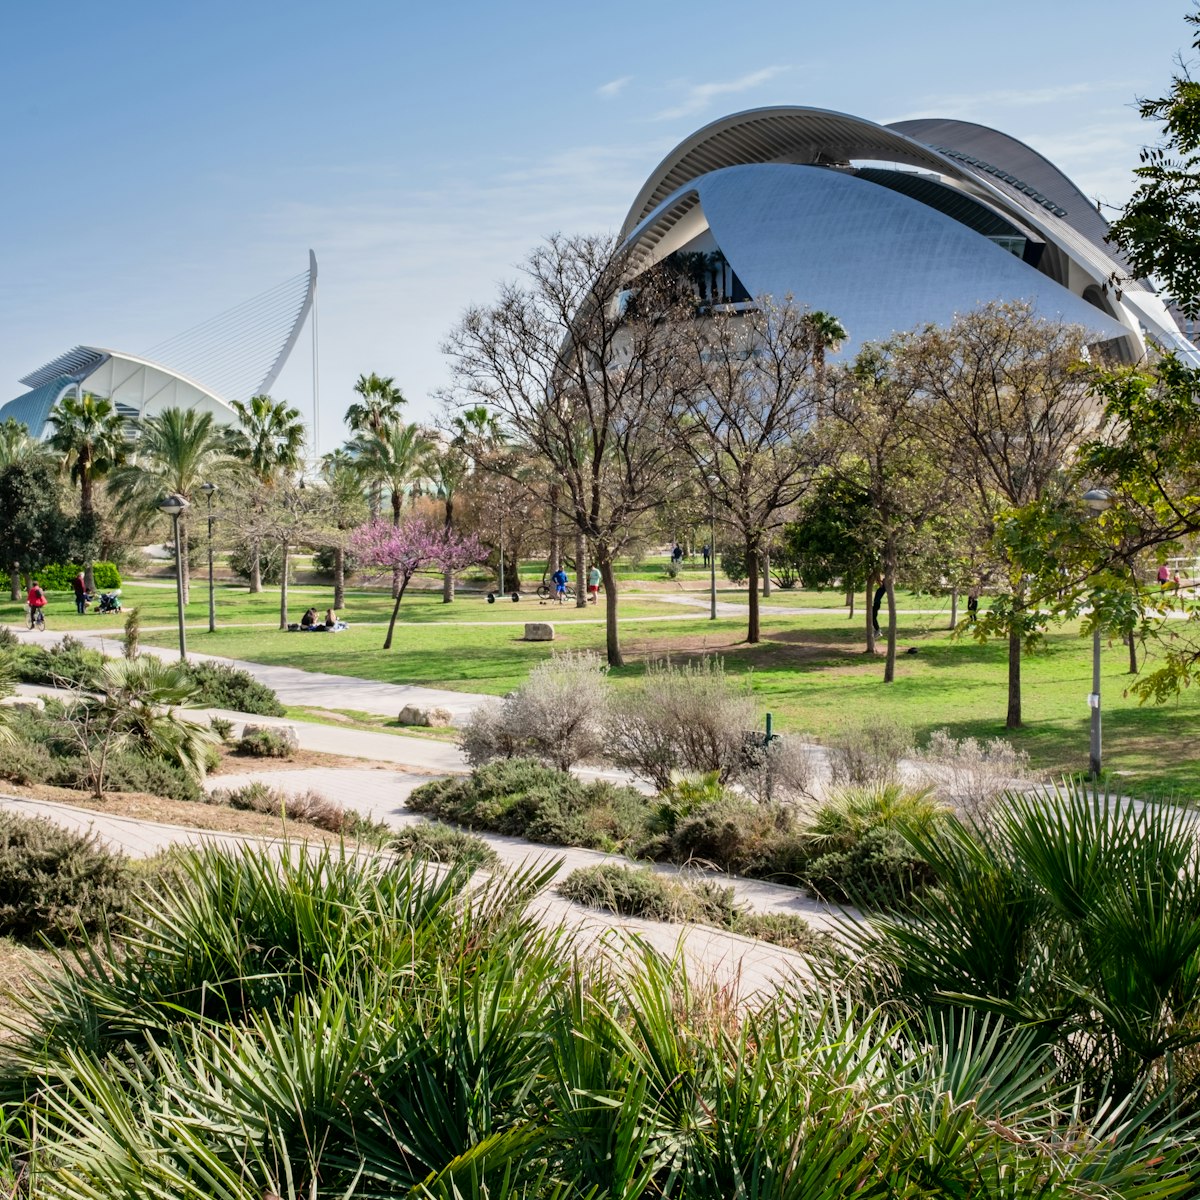 The Jardí del Túria (Túria gardens), a public park with cycle ways, footpaths, sports facilities as well as the futuristic City of Arts and Sciences in the background.